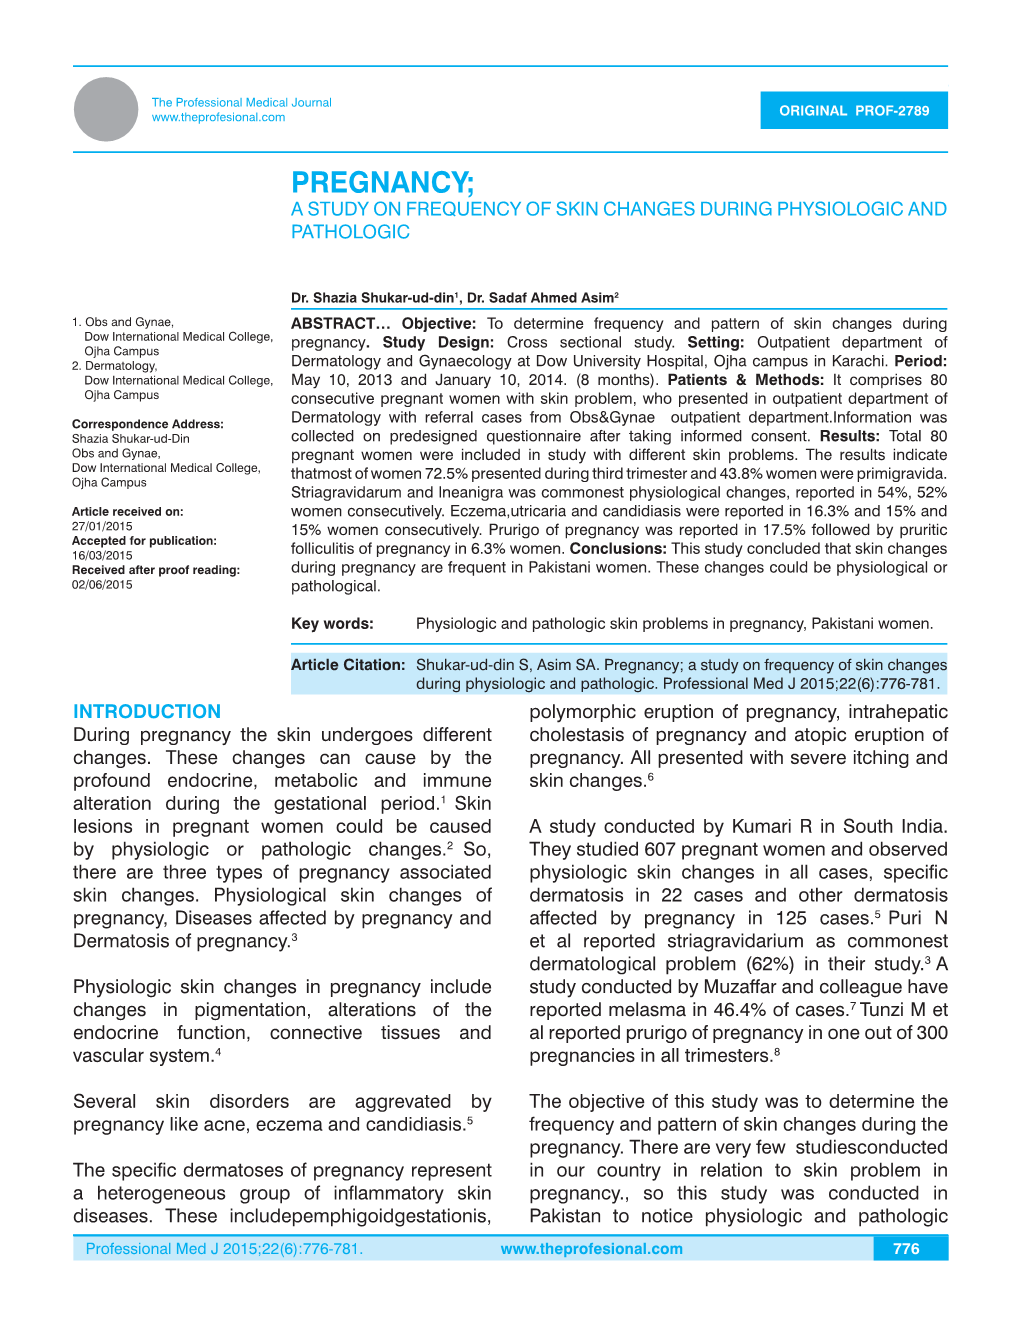 Pregnancy; a Study on Frequency of Skin Changes During Physiologic and Pathologic